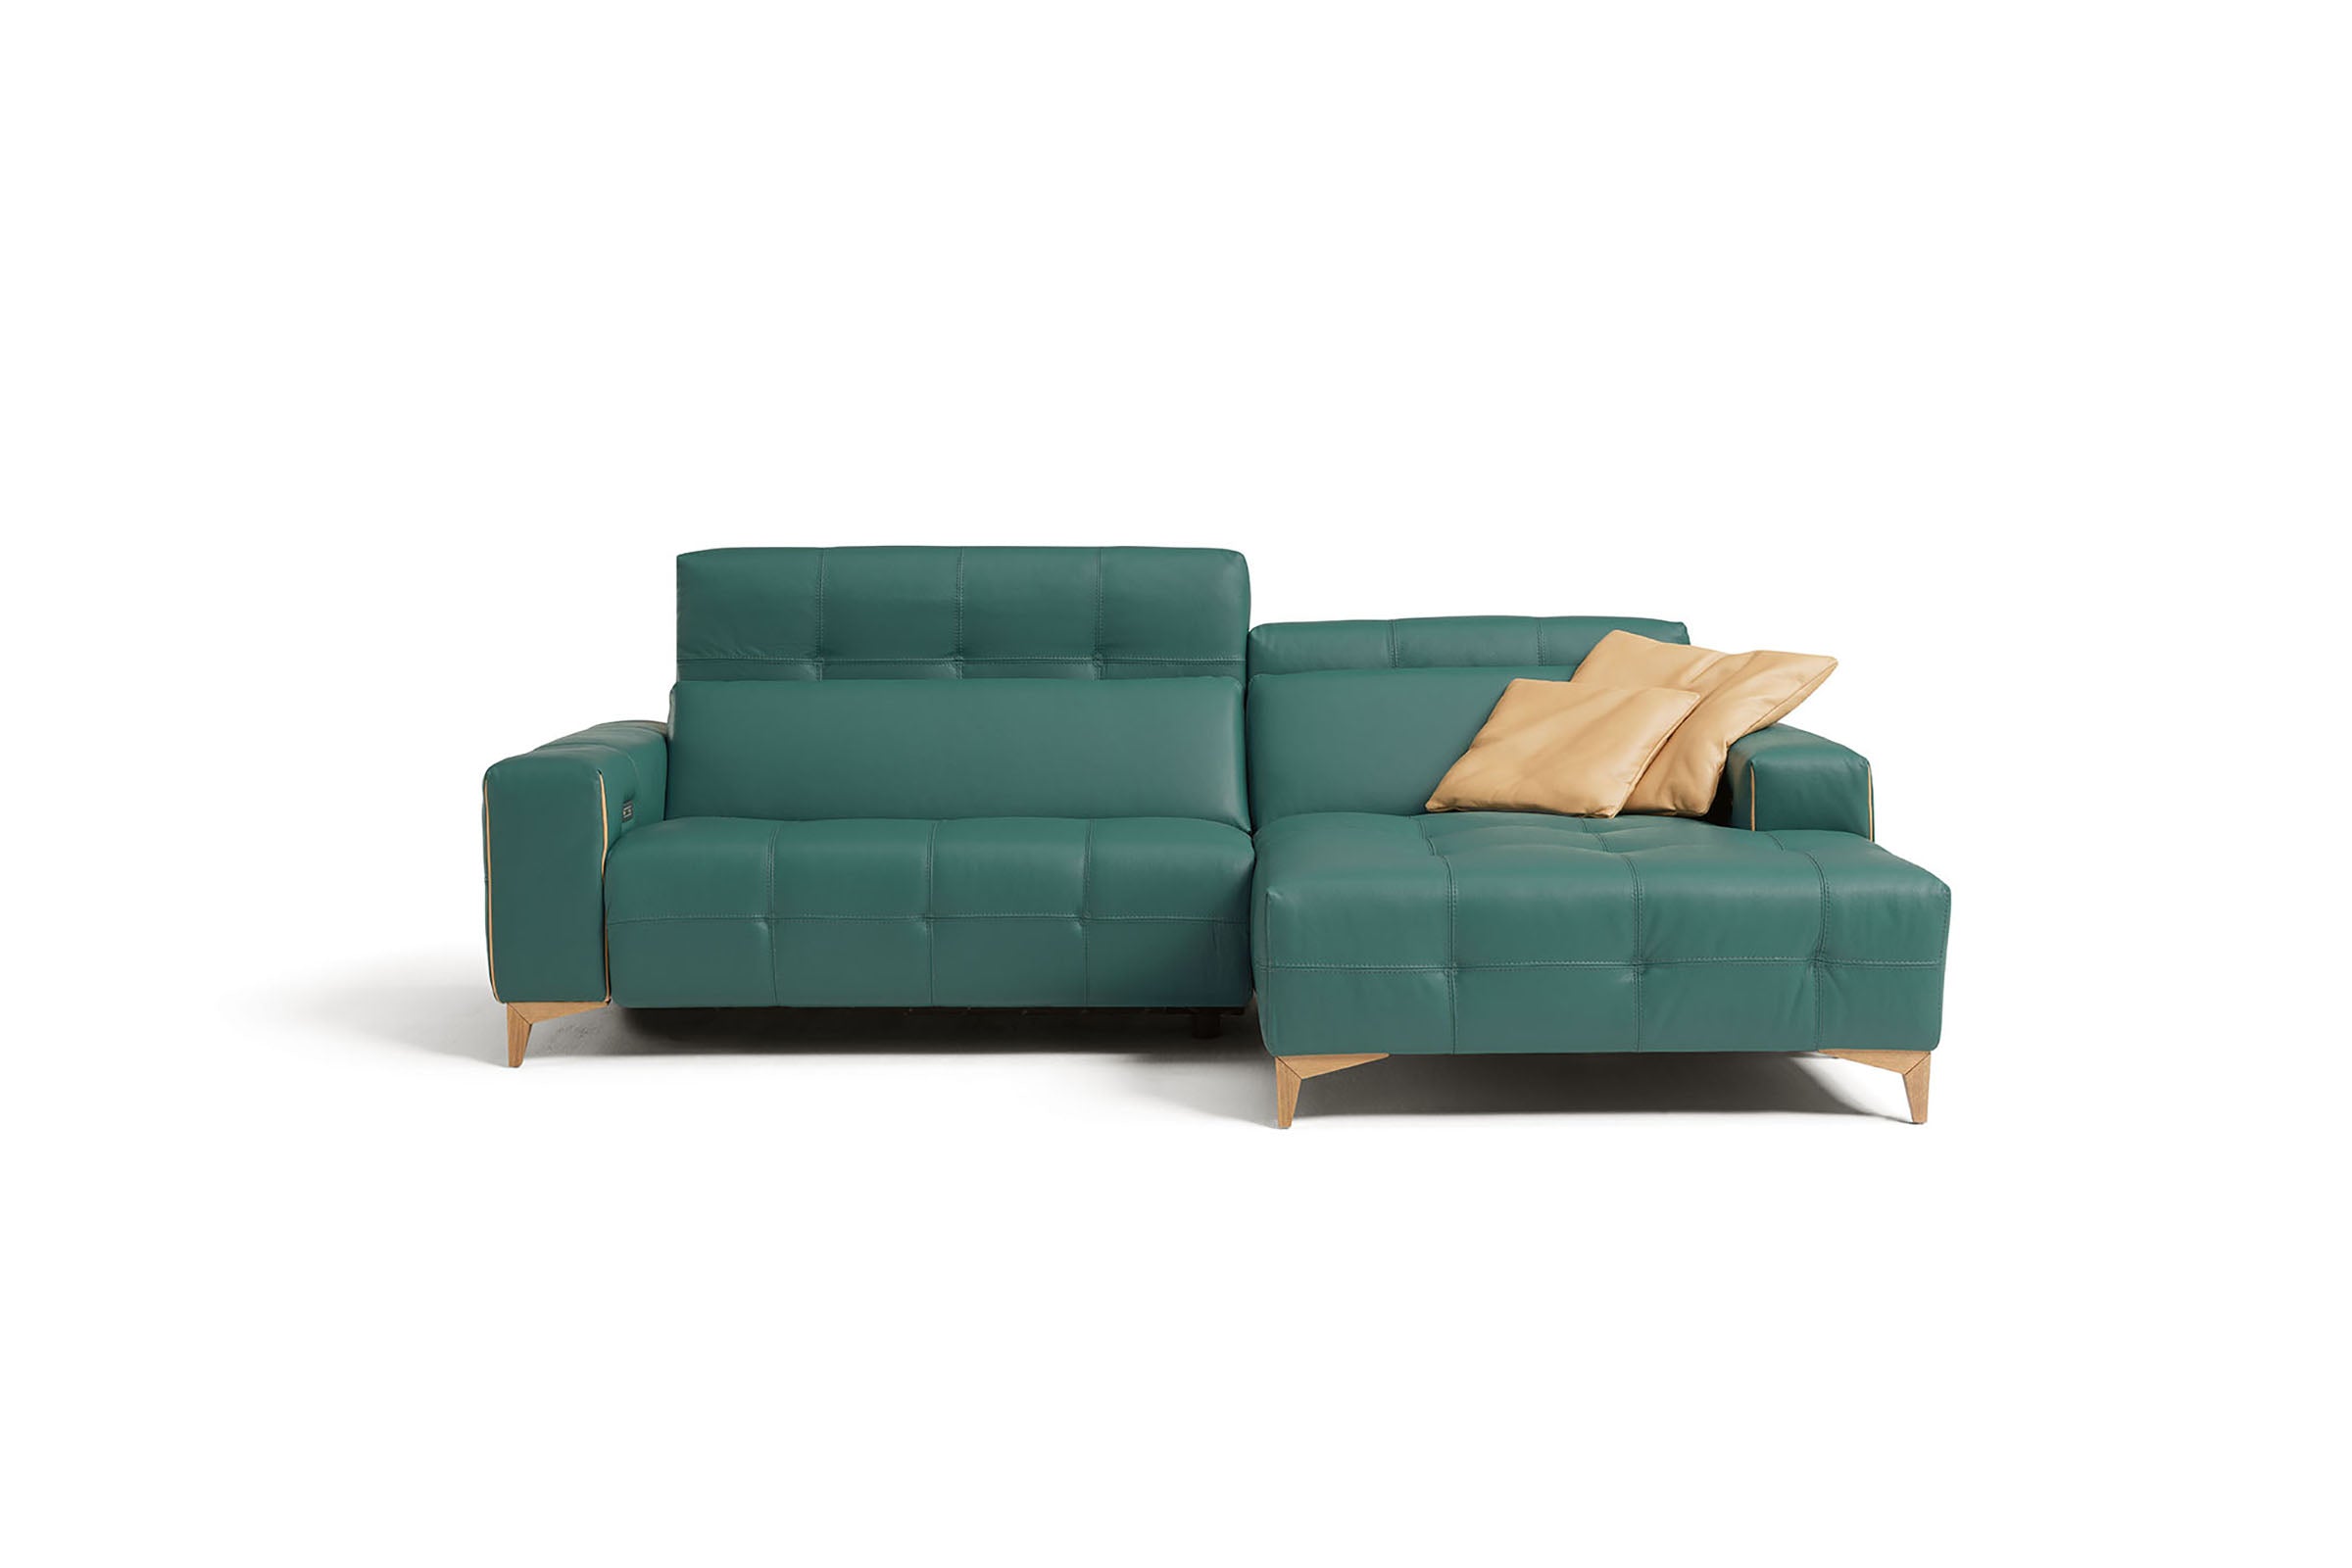 Tiffany small sofa with chaise